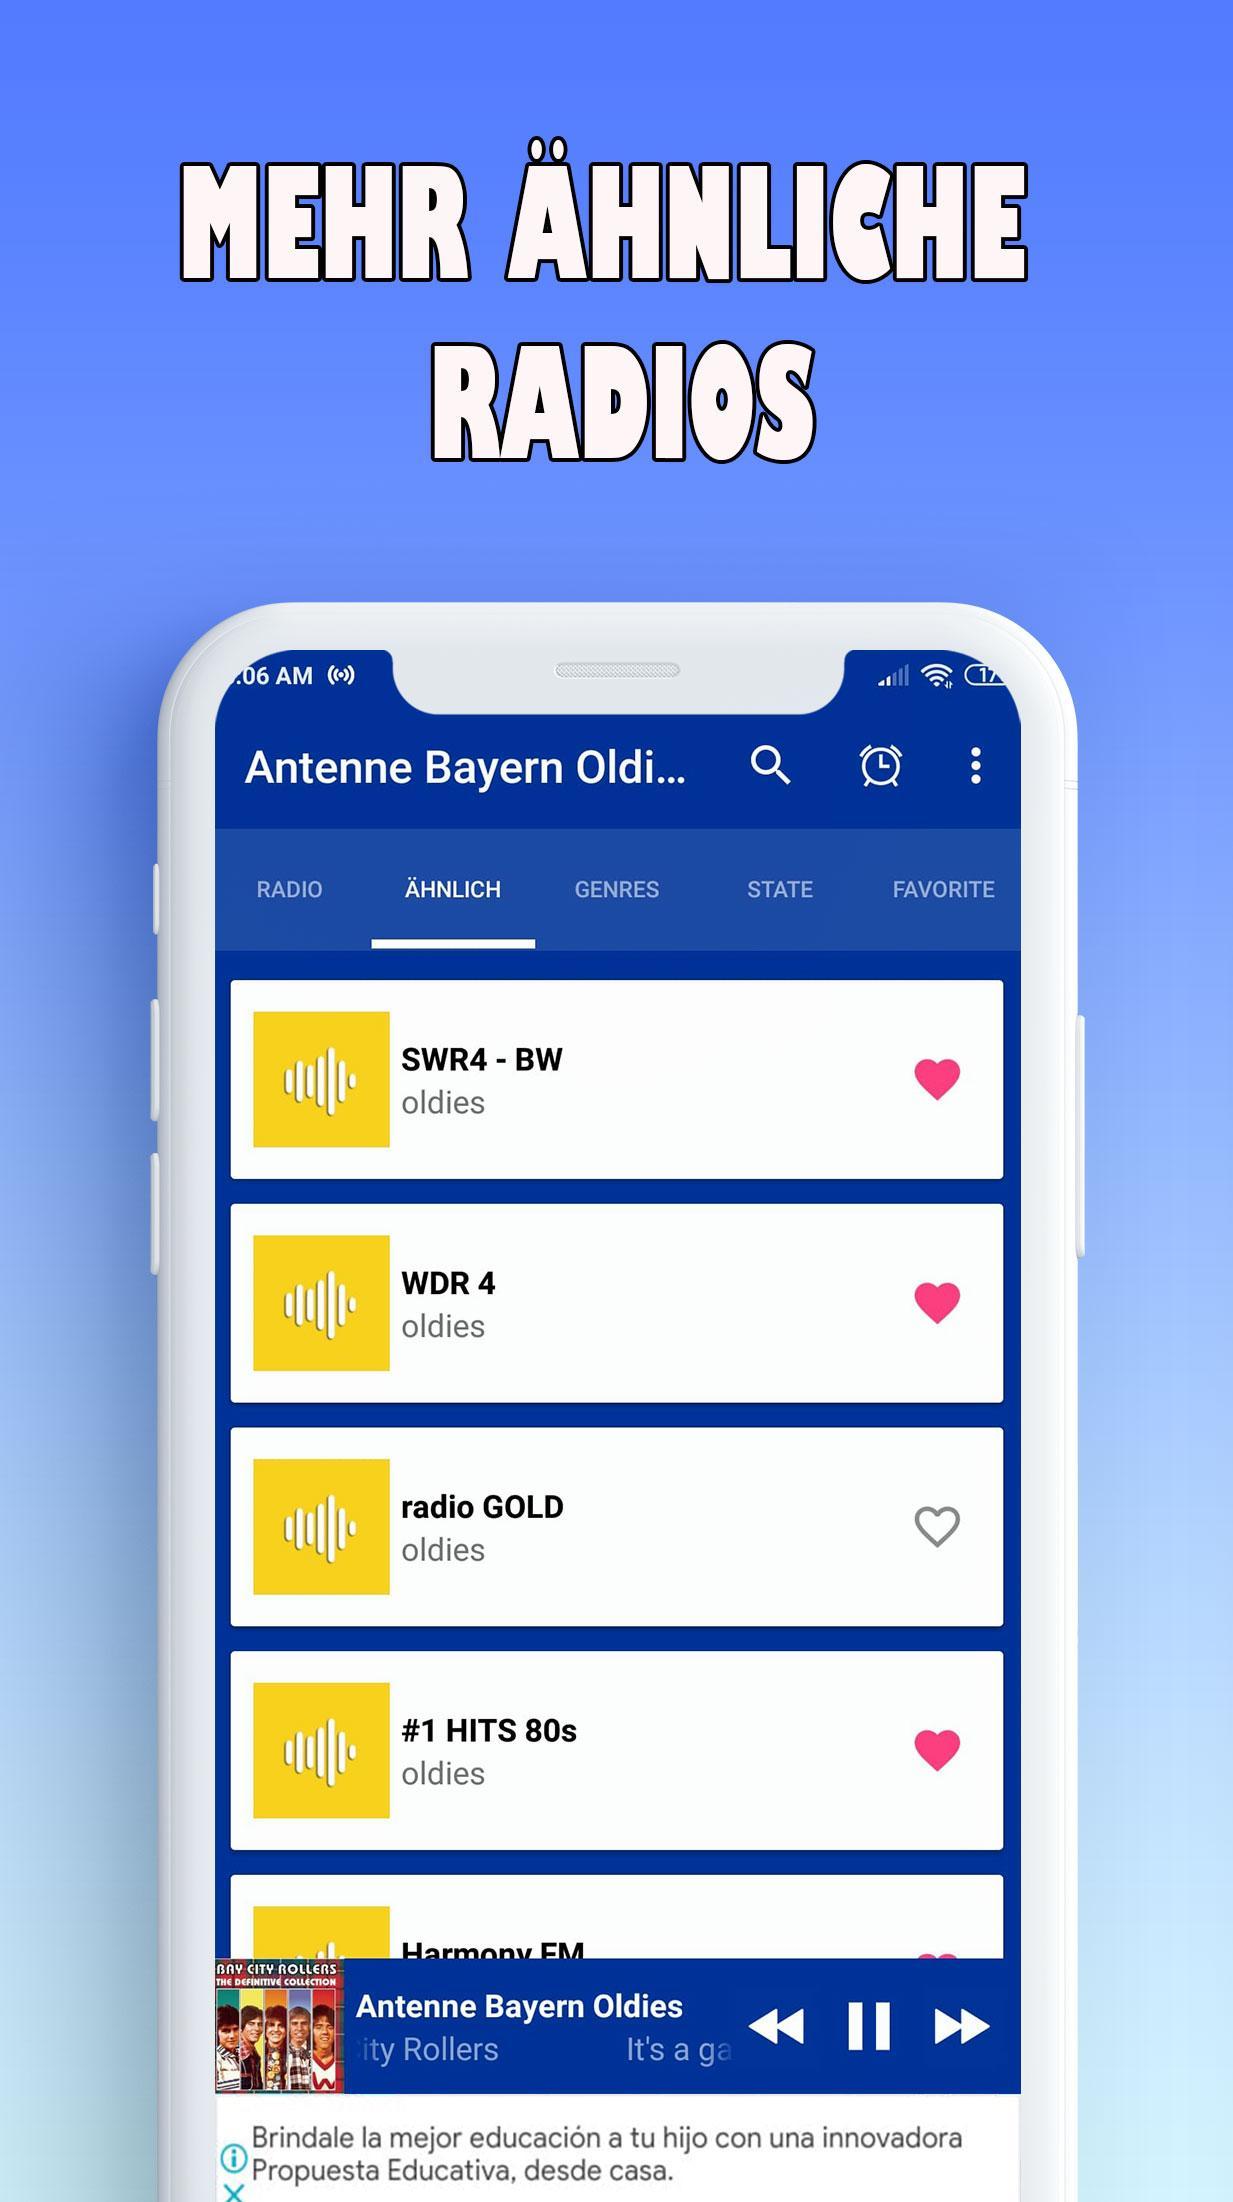 Antenne Bayern Oldies But Goldies for Android - APK Download